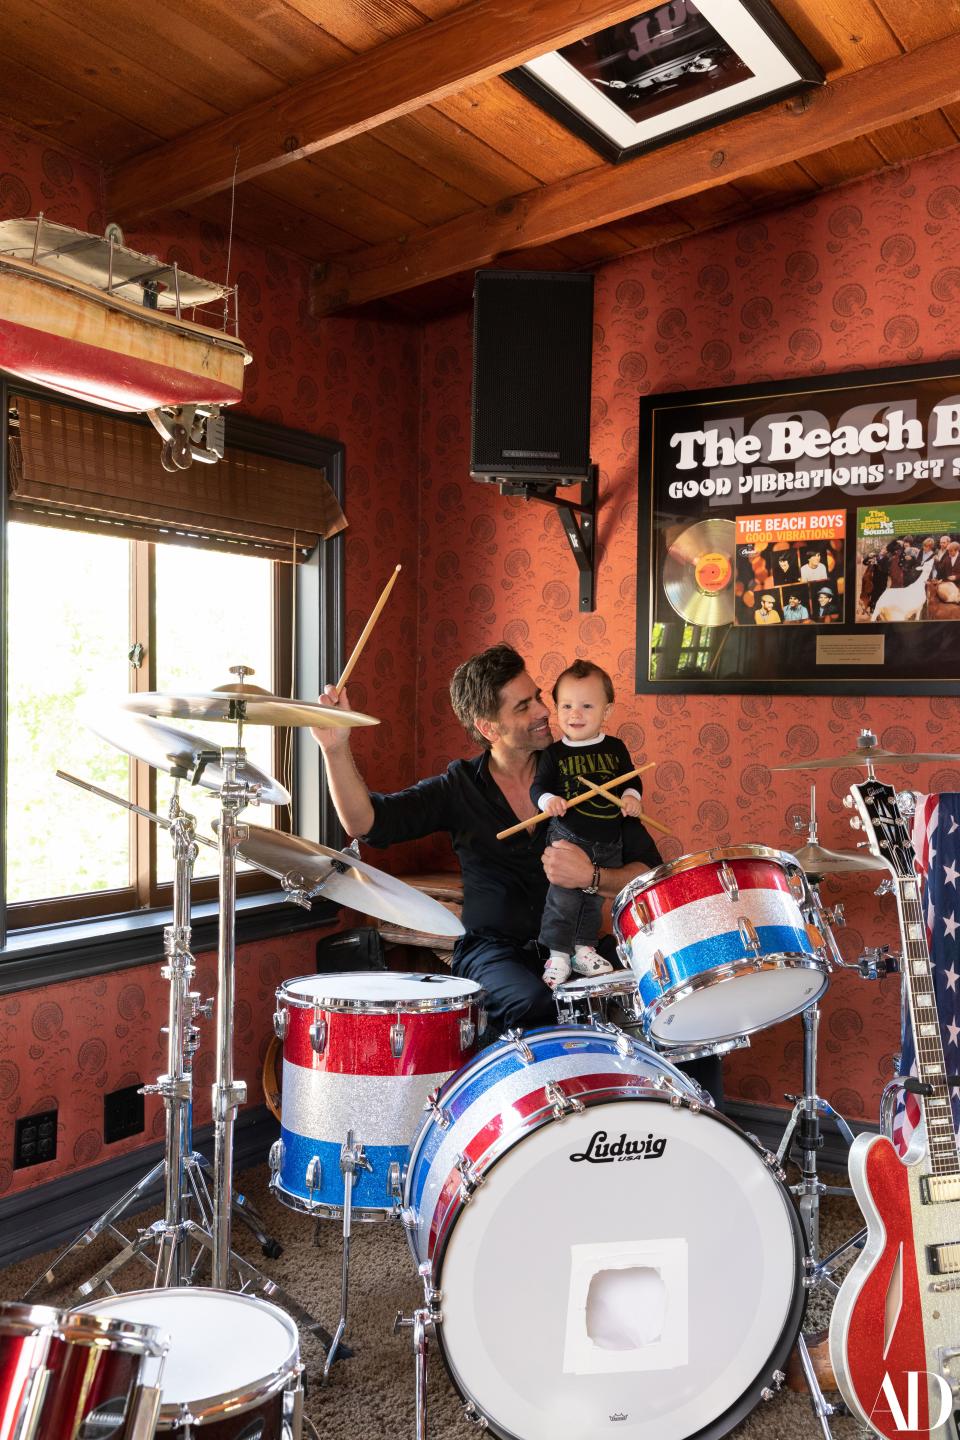 Stamos drums with his son, Billy. He first used this patriotic-themed instrument (from Ludwig Drums) when he performed with the Beach Boys and Jimmy Buffett in PBS’s A Capitol Fourth concert in Washington, D.C.